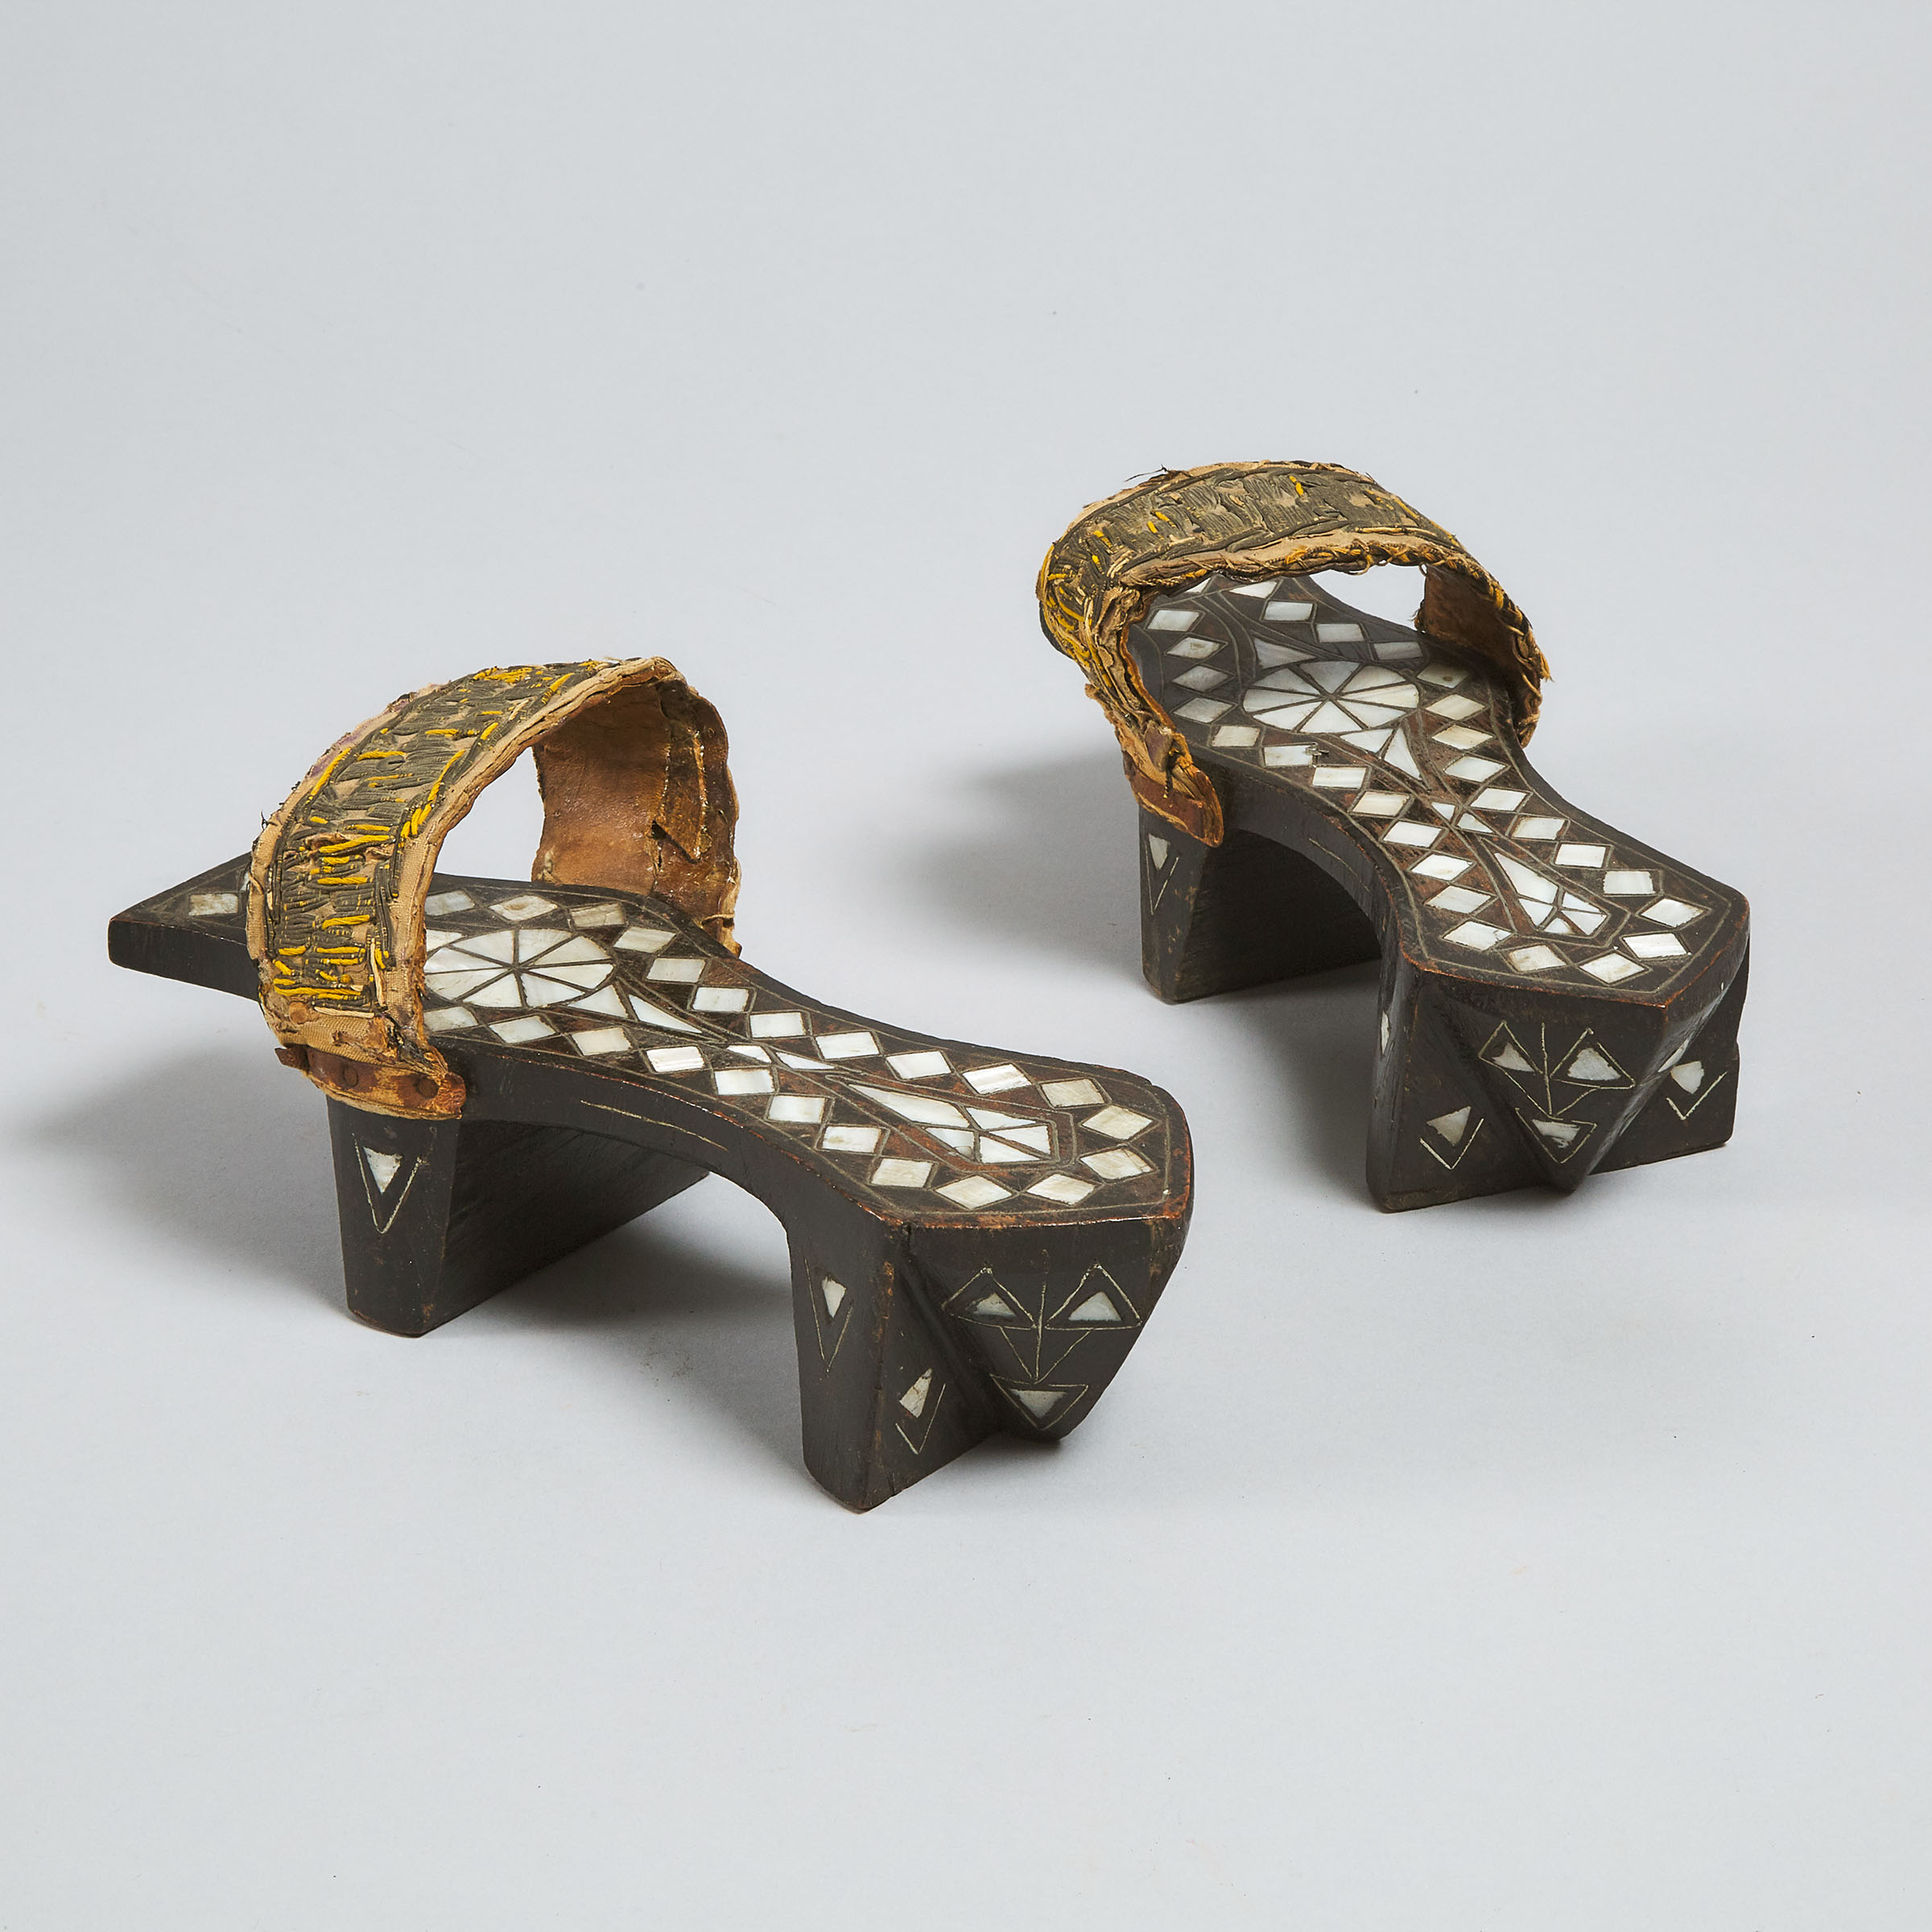 Pair of Turkish Ottoman Silver Wire and Mother-of-Pearl Inlaid Bath Shoes, 19th century